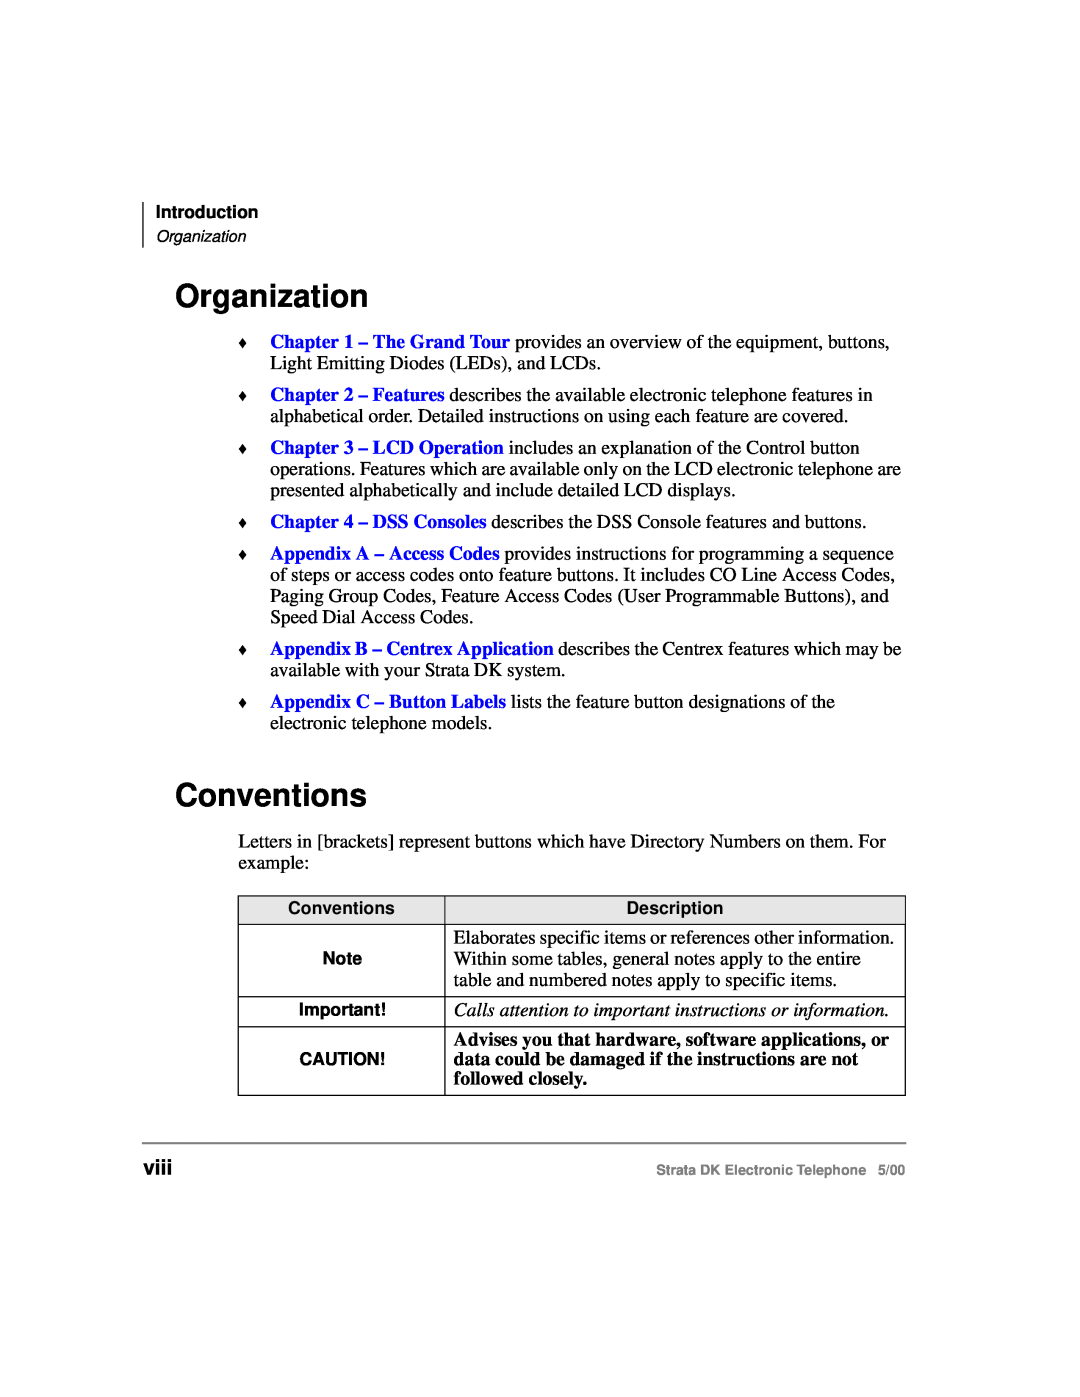 Toshiba Strata DK manual Organization, Conventions, viii, Elaborates specific items or references other information 